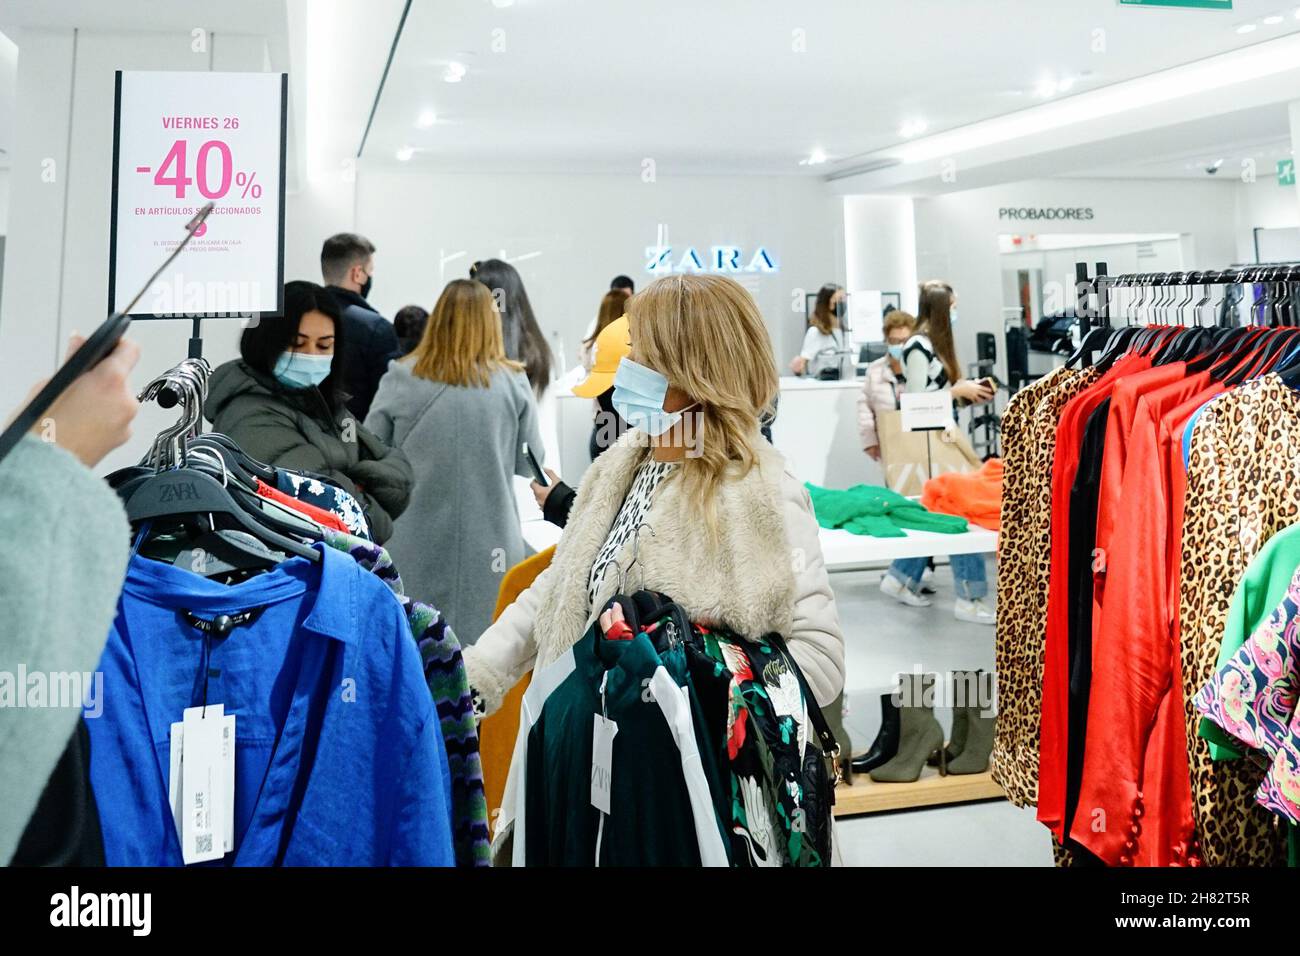 Page 3 - Zara Store Spain High Resolution Stock Photography and Images -  Alamy